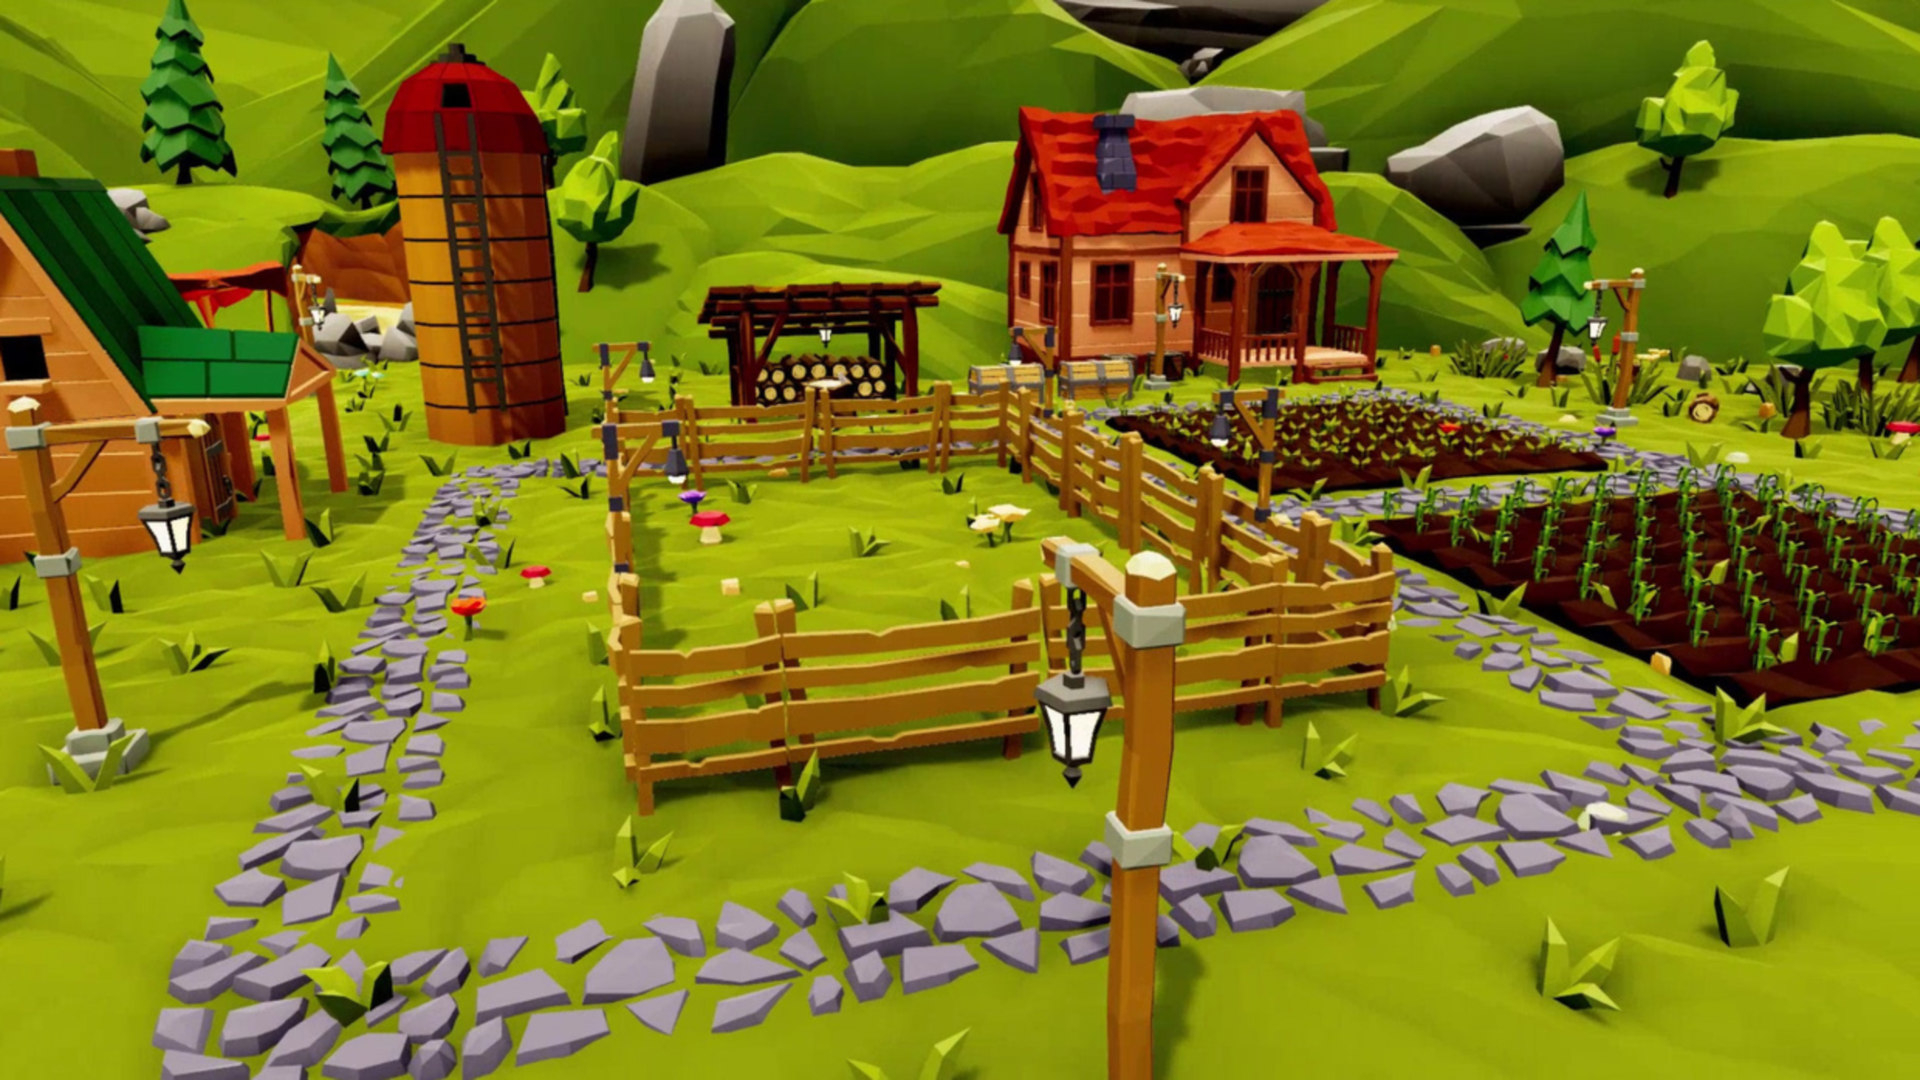 1920x1080 Land of Amara' Aims to Deliver 'Stardew Valley' Style Gameplay in VR &acirc;&#128;&#147; Road to VR